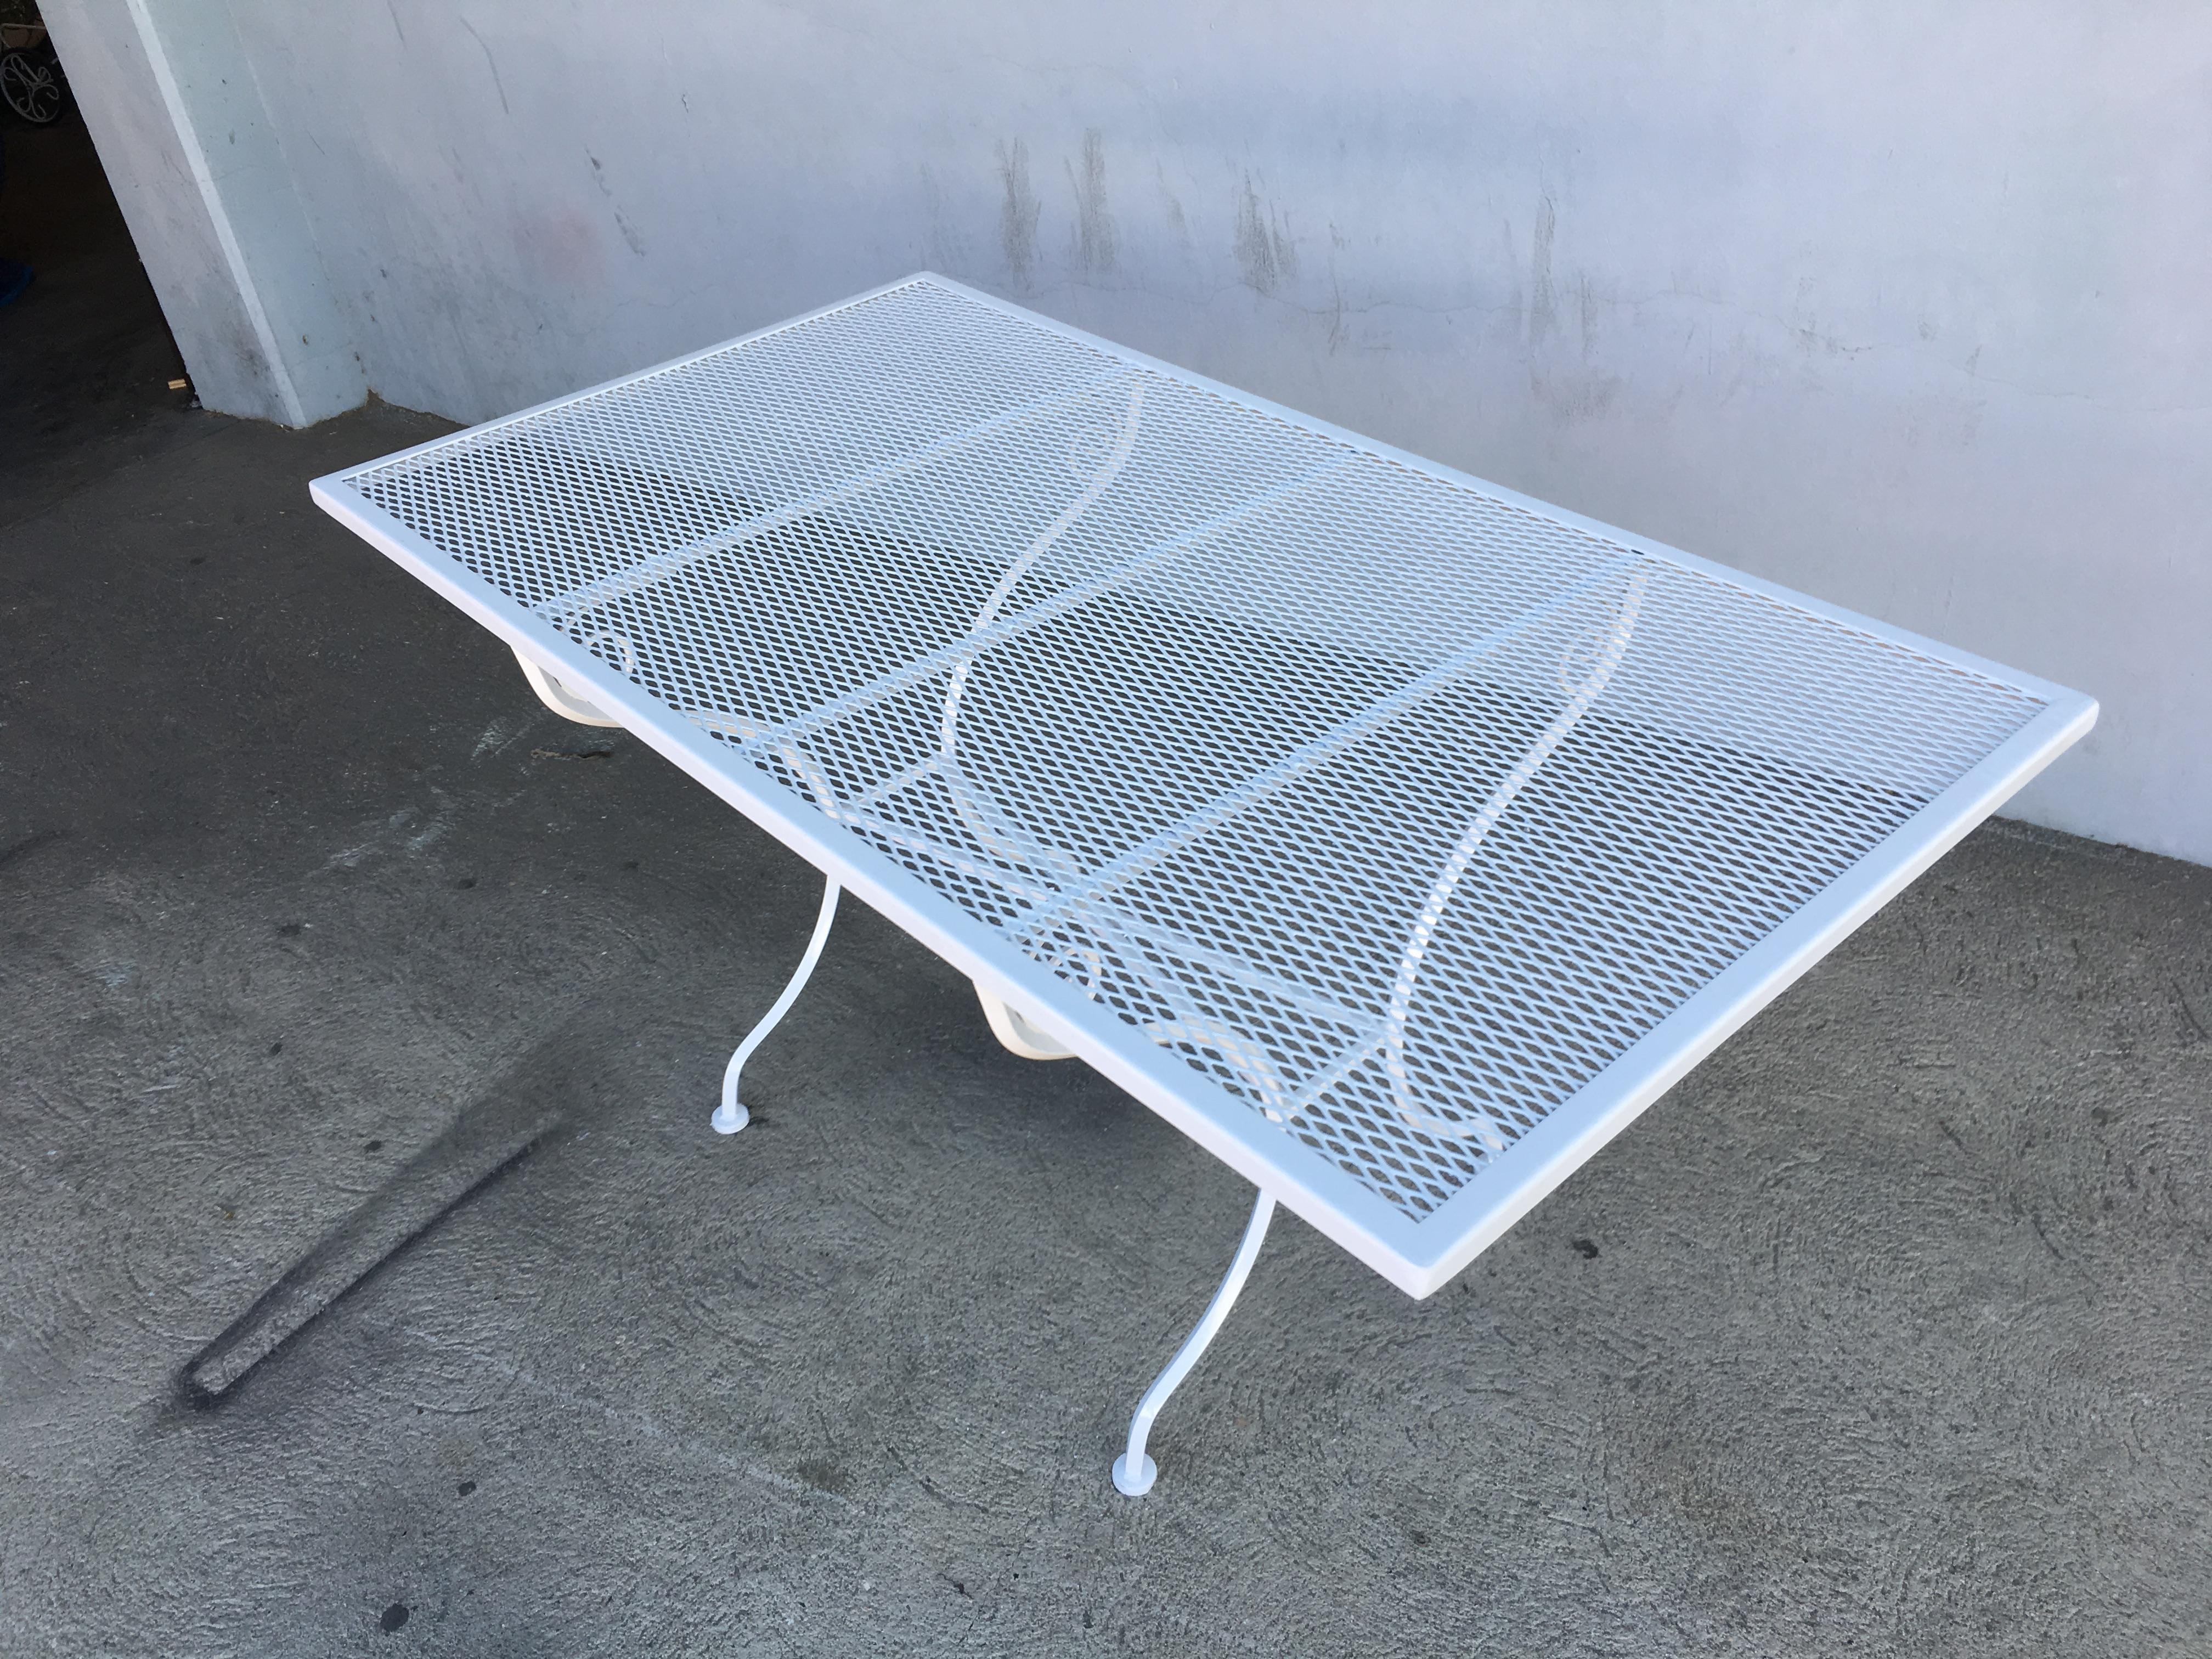 Rare midcentury mesh steel picnic table with scrolling legs by the Woodard company. Woodard chairs to accompany this table are available in store, circa 1950 by Woodard